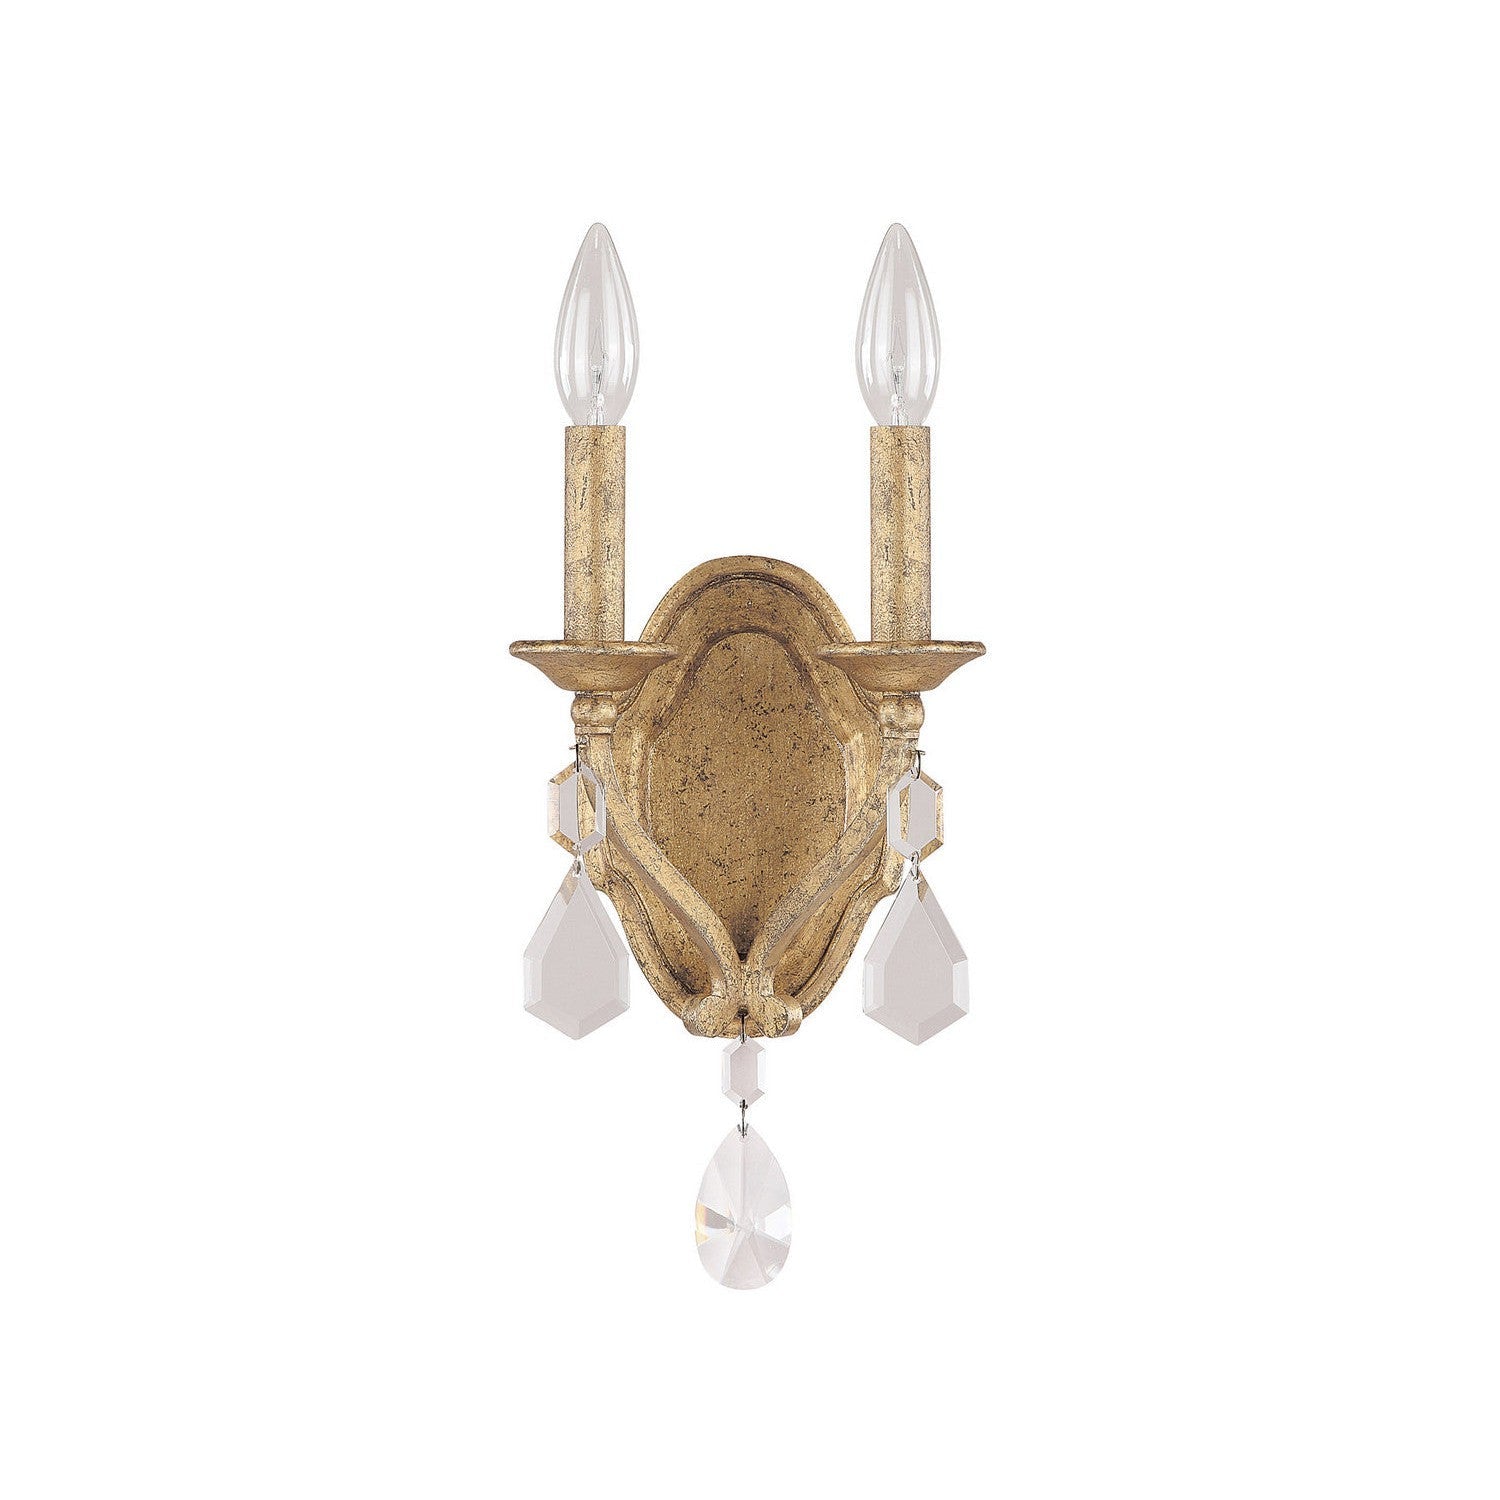 Capital Blakely 1617AG-CR Wall Sconce Light - Antique Gold